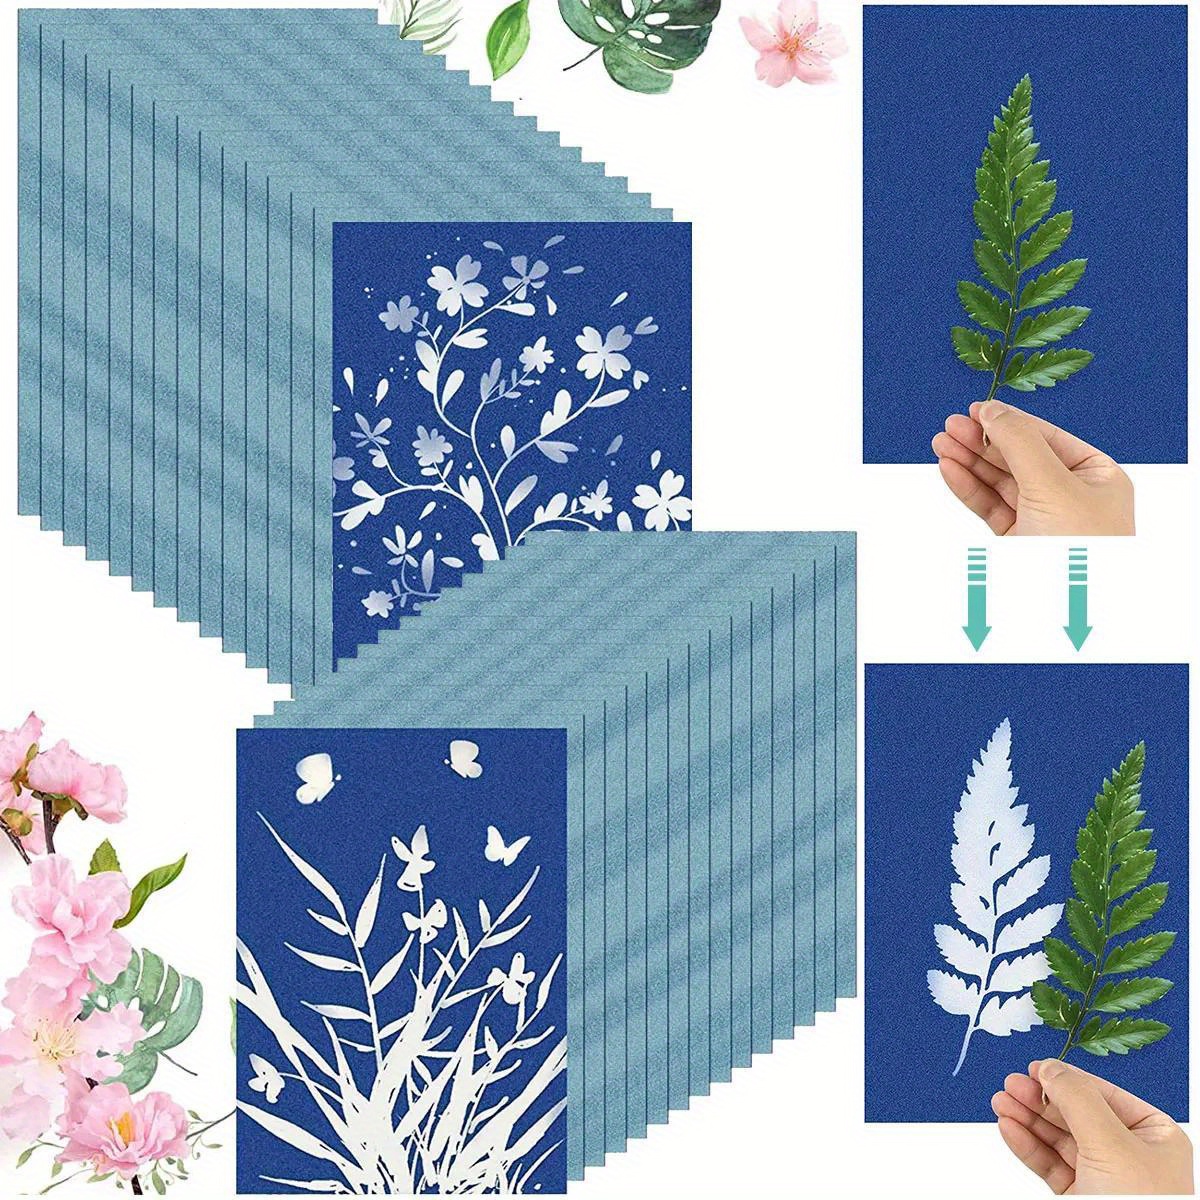 

14-piece Cyanotype Sun Print Paper Kit - Diy Nature Art For Home Decor, Easy Solar Drawing & Plant Specimens, 5.8x8.3 Inches